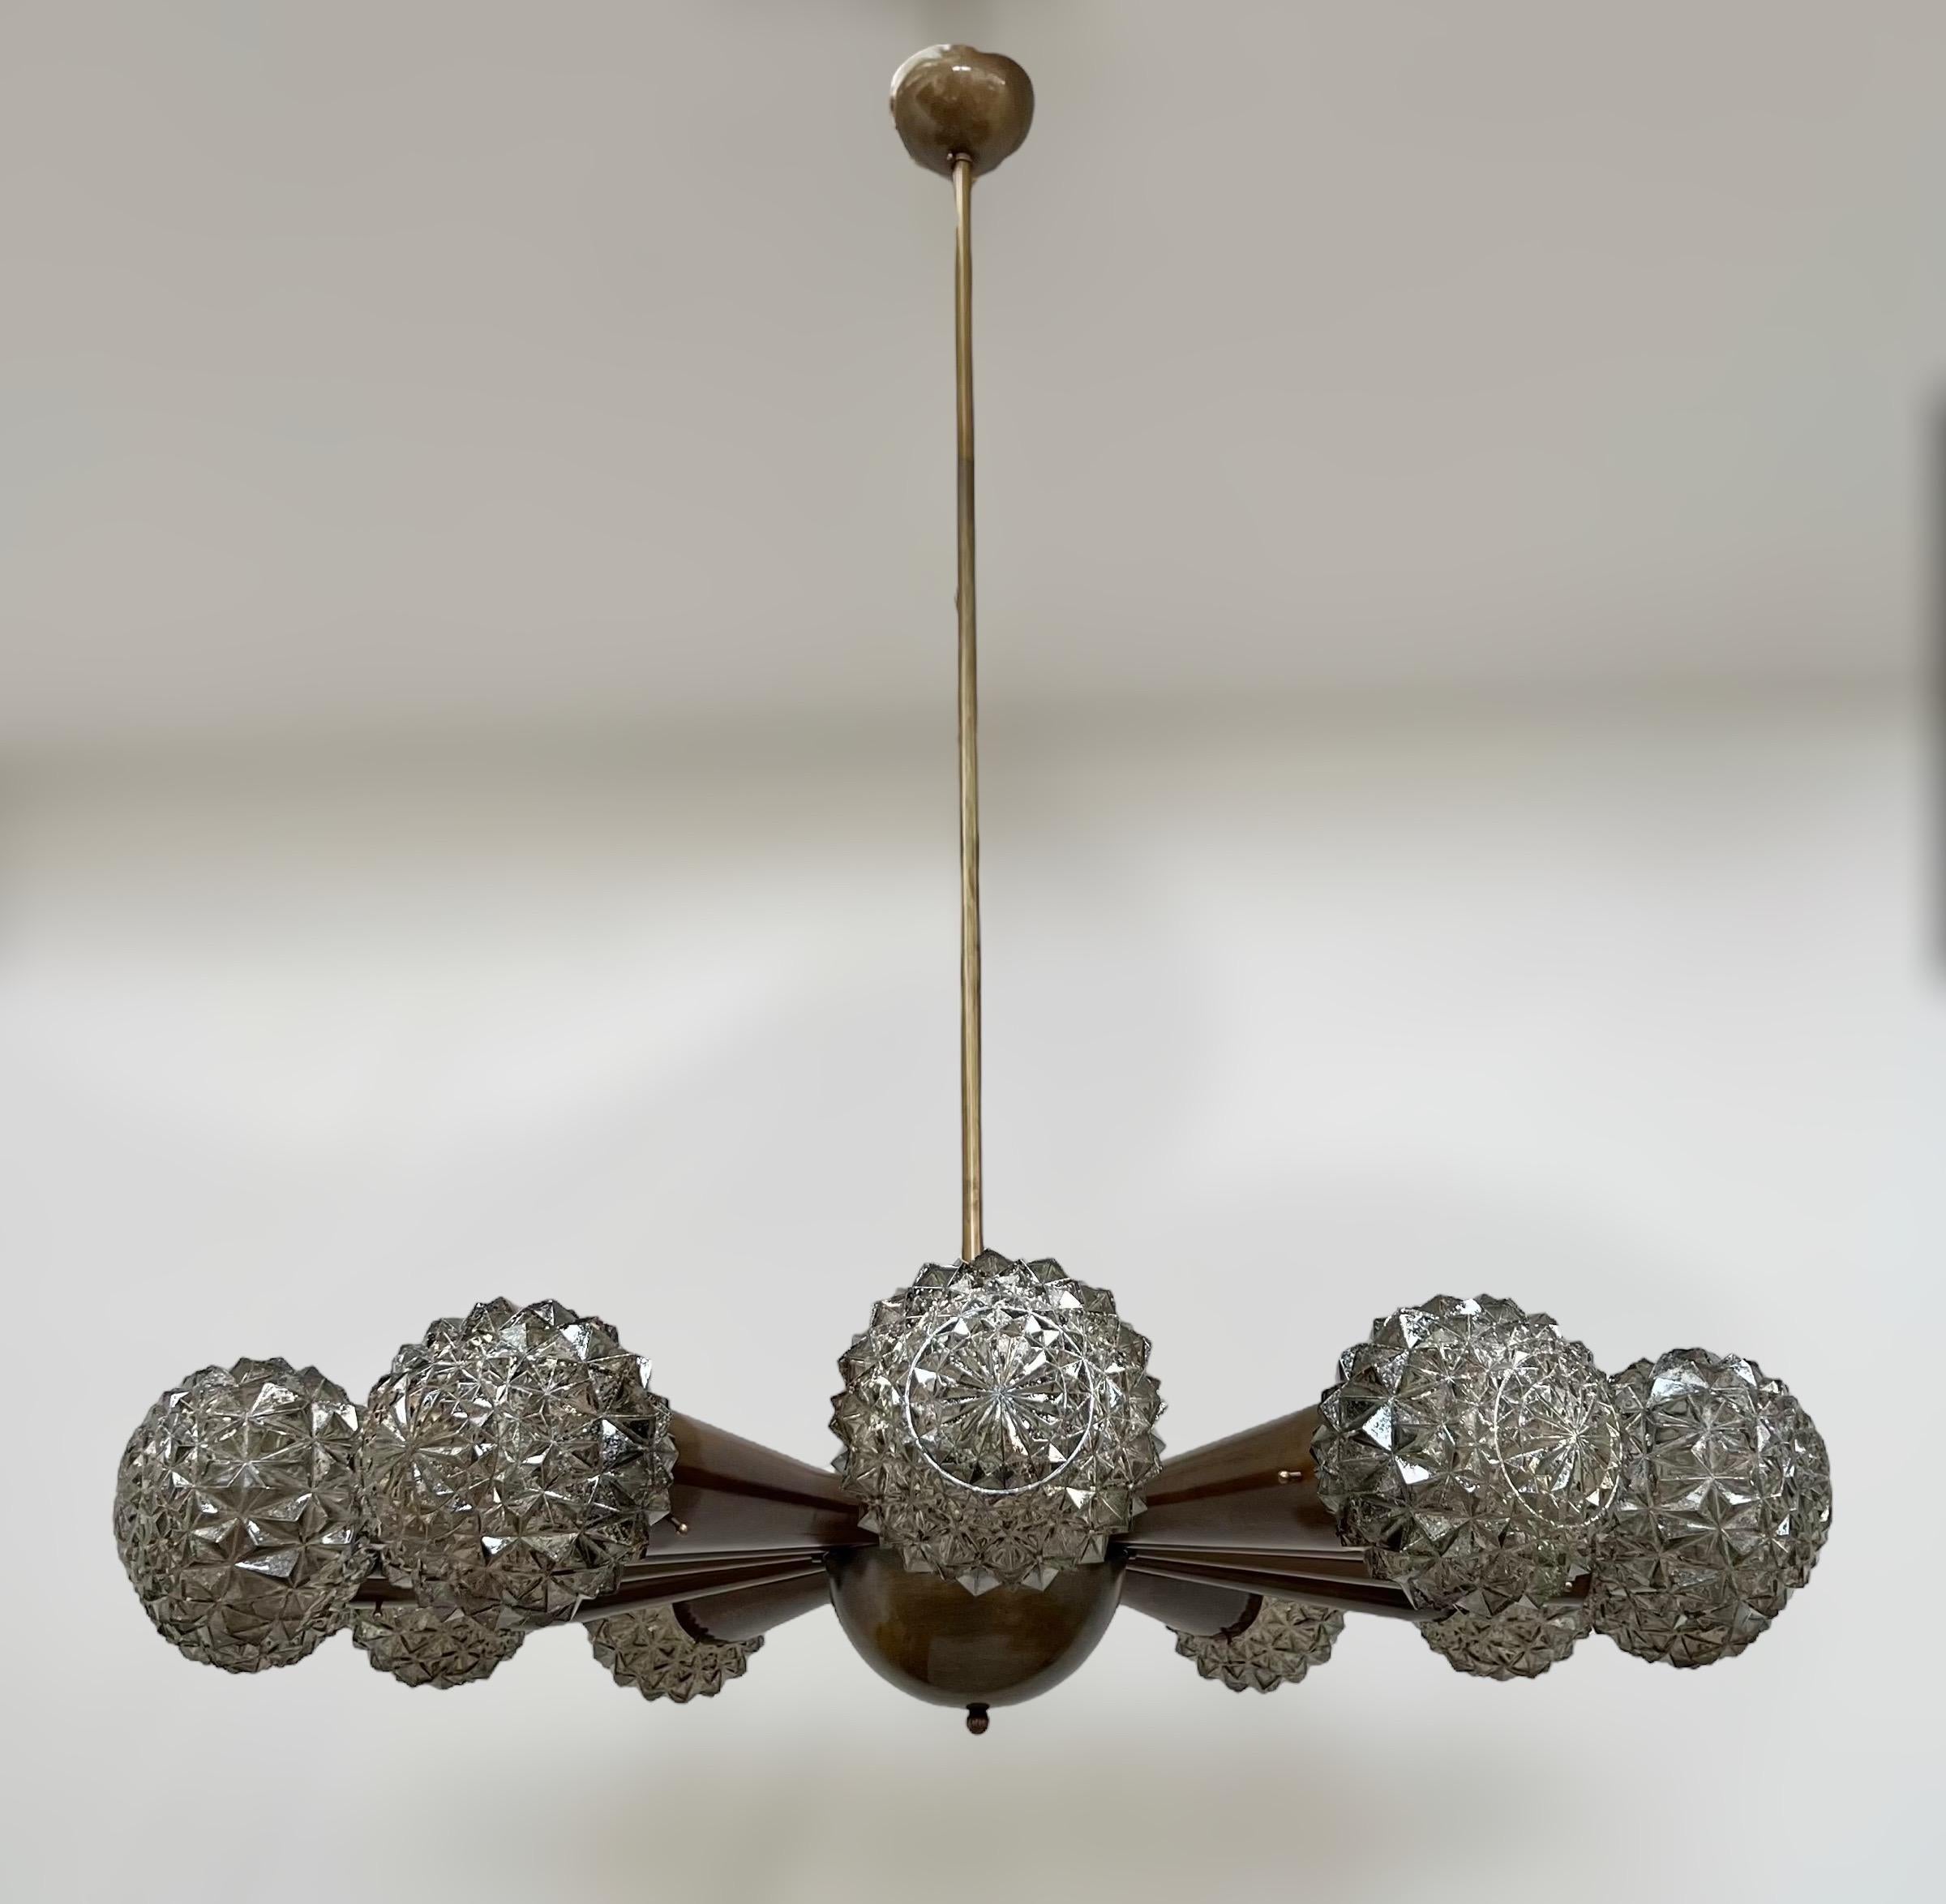 Italian chandelier with smoky faceted Murano glass shades, mounted on bronzed finish frame / Designed by Fabio Bergomi for Fabio Ltd / Made in Italy
12 lights / E12 or E14 type / max 40W each
Measures: Diameter 43 inches / Height 49 inches including